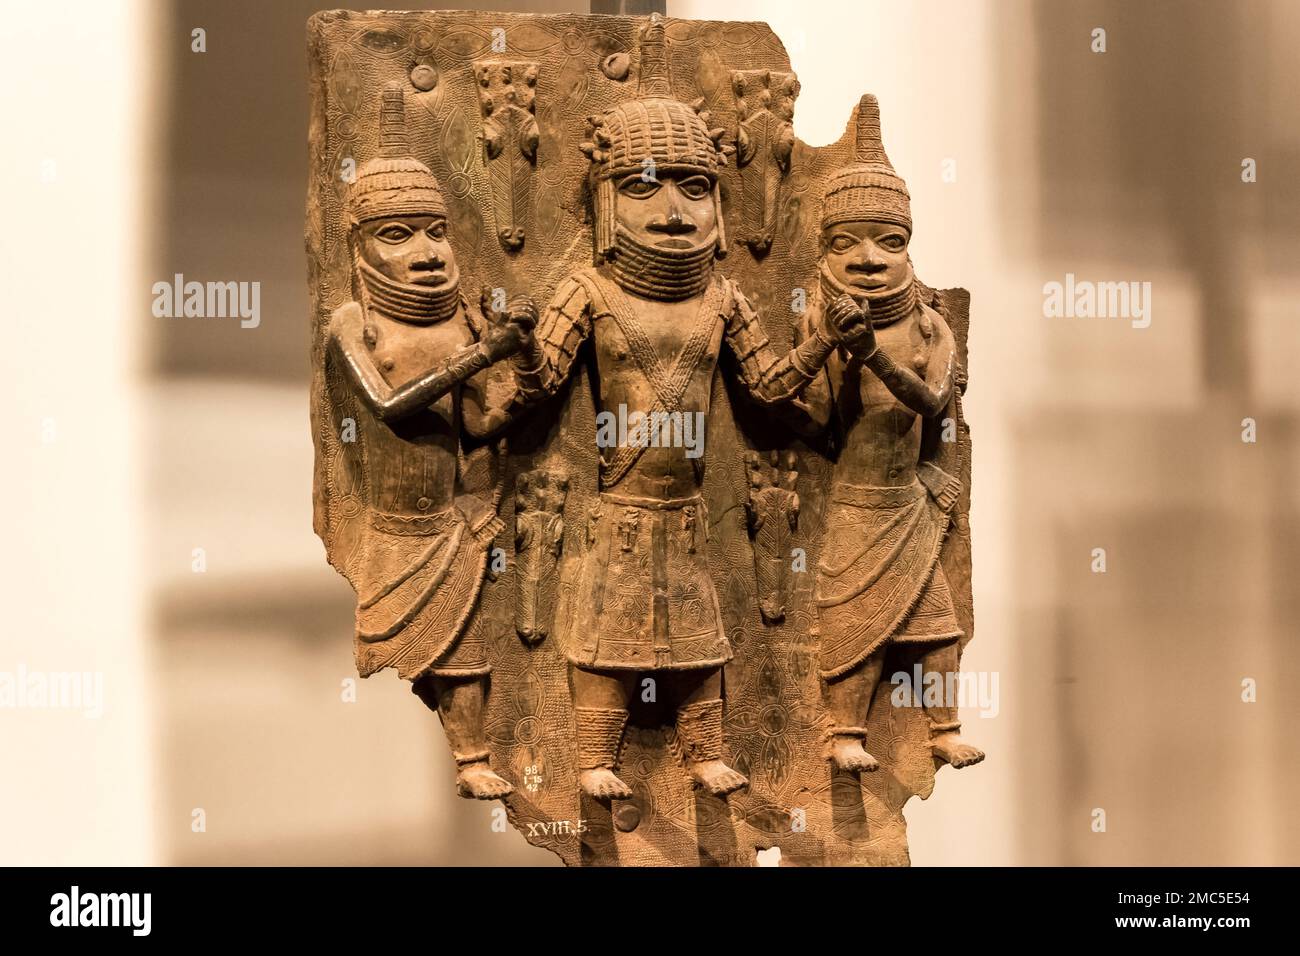 The Benin Bronzes, group of sculptures created from at least the 16th century in the West African Kingdom of Benin, displayed at the British Museum Stock Photo